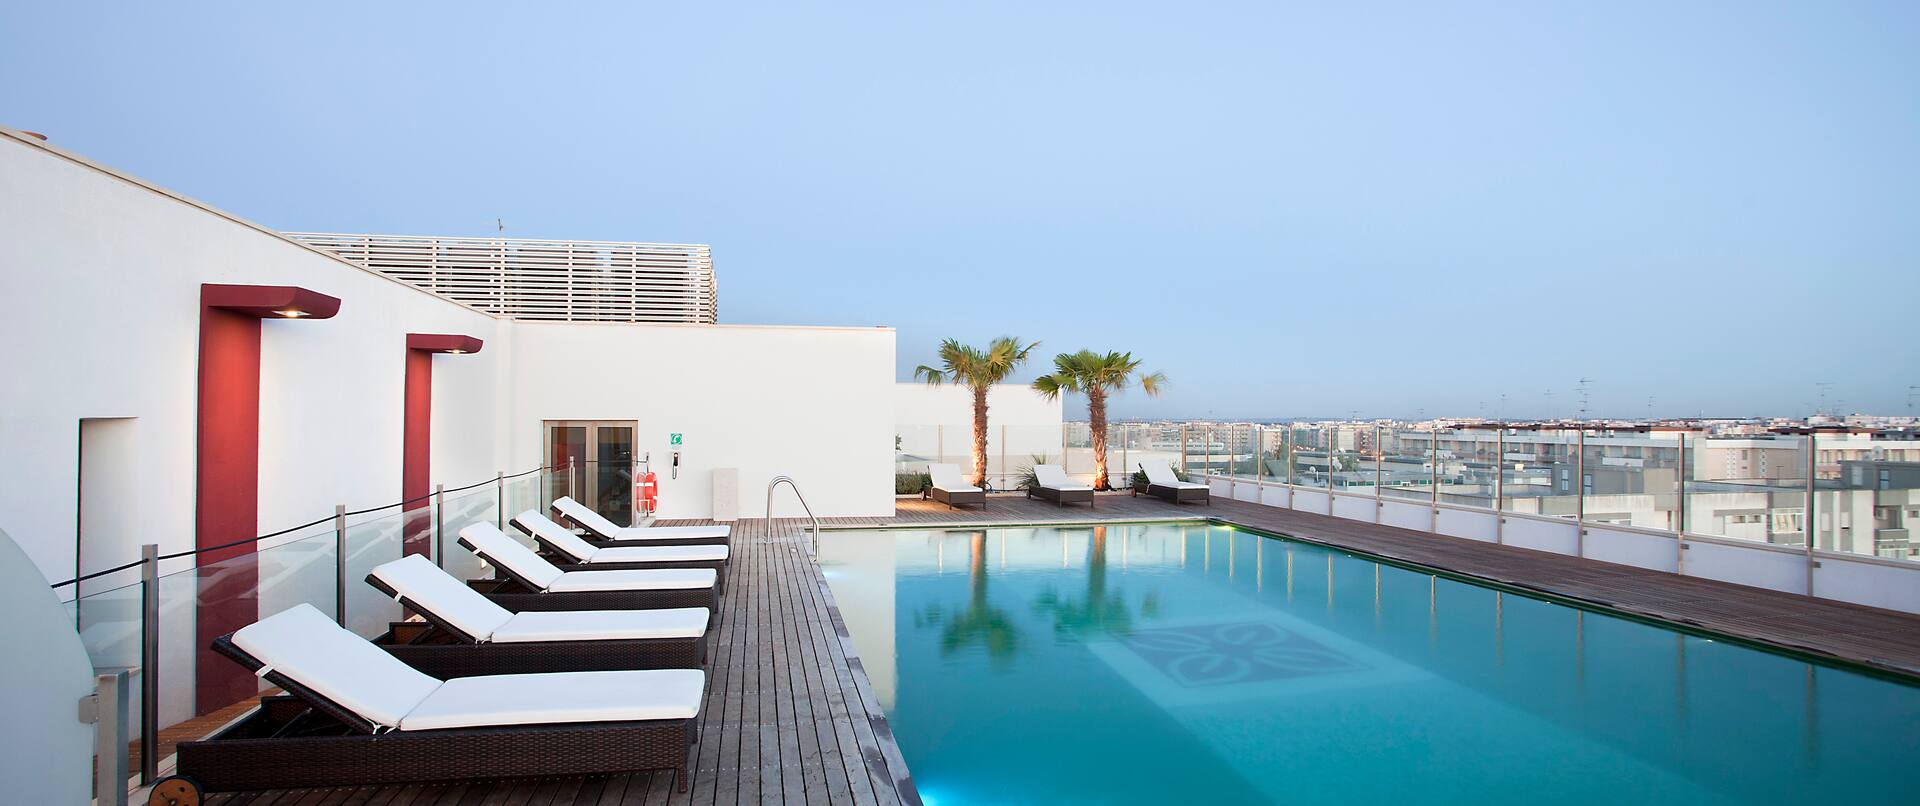 Eight Lounge Chairs by Illuminated Rooftop Pool Overlooking City at Dusk